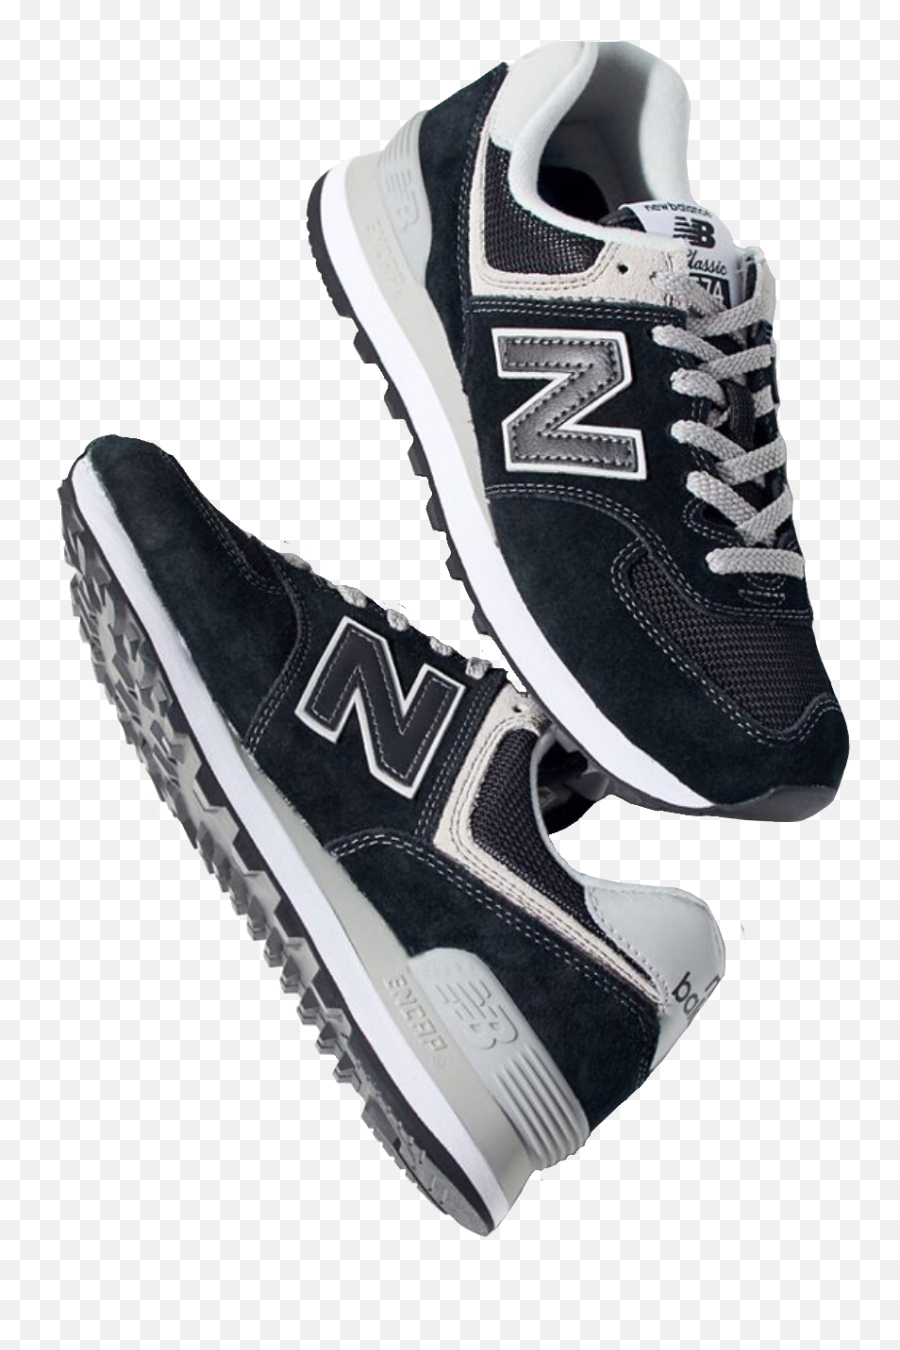 Grey Blue New Balance Shoes Png In 2020 - Tenis New Balance Png,Tennis Shoes Png